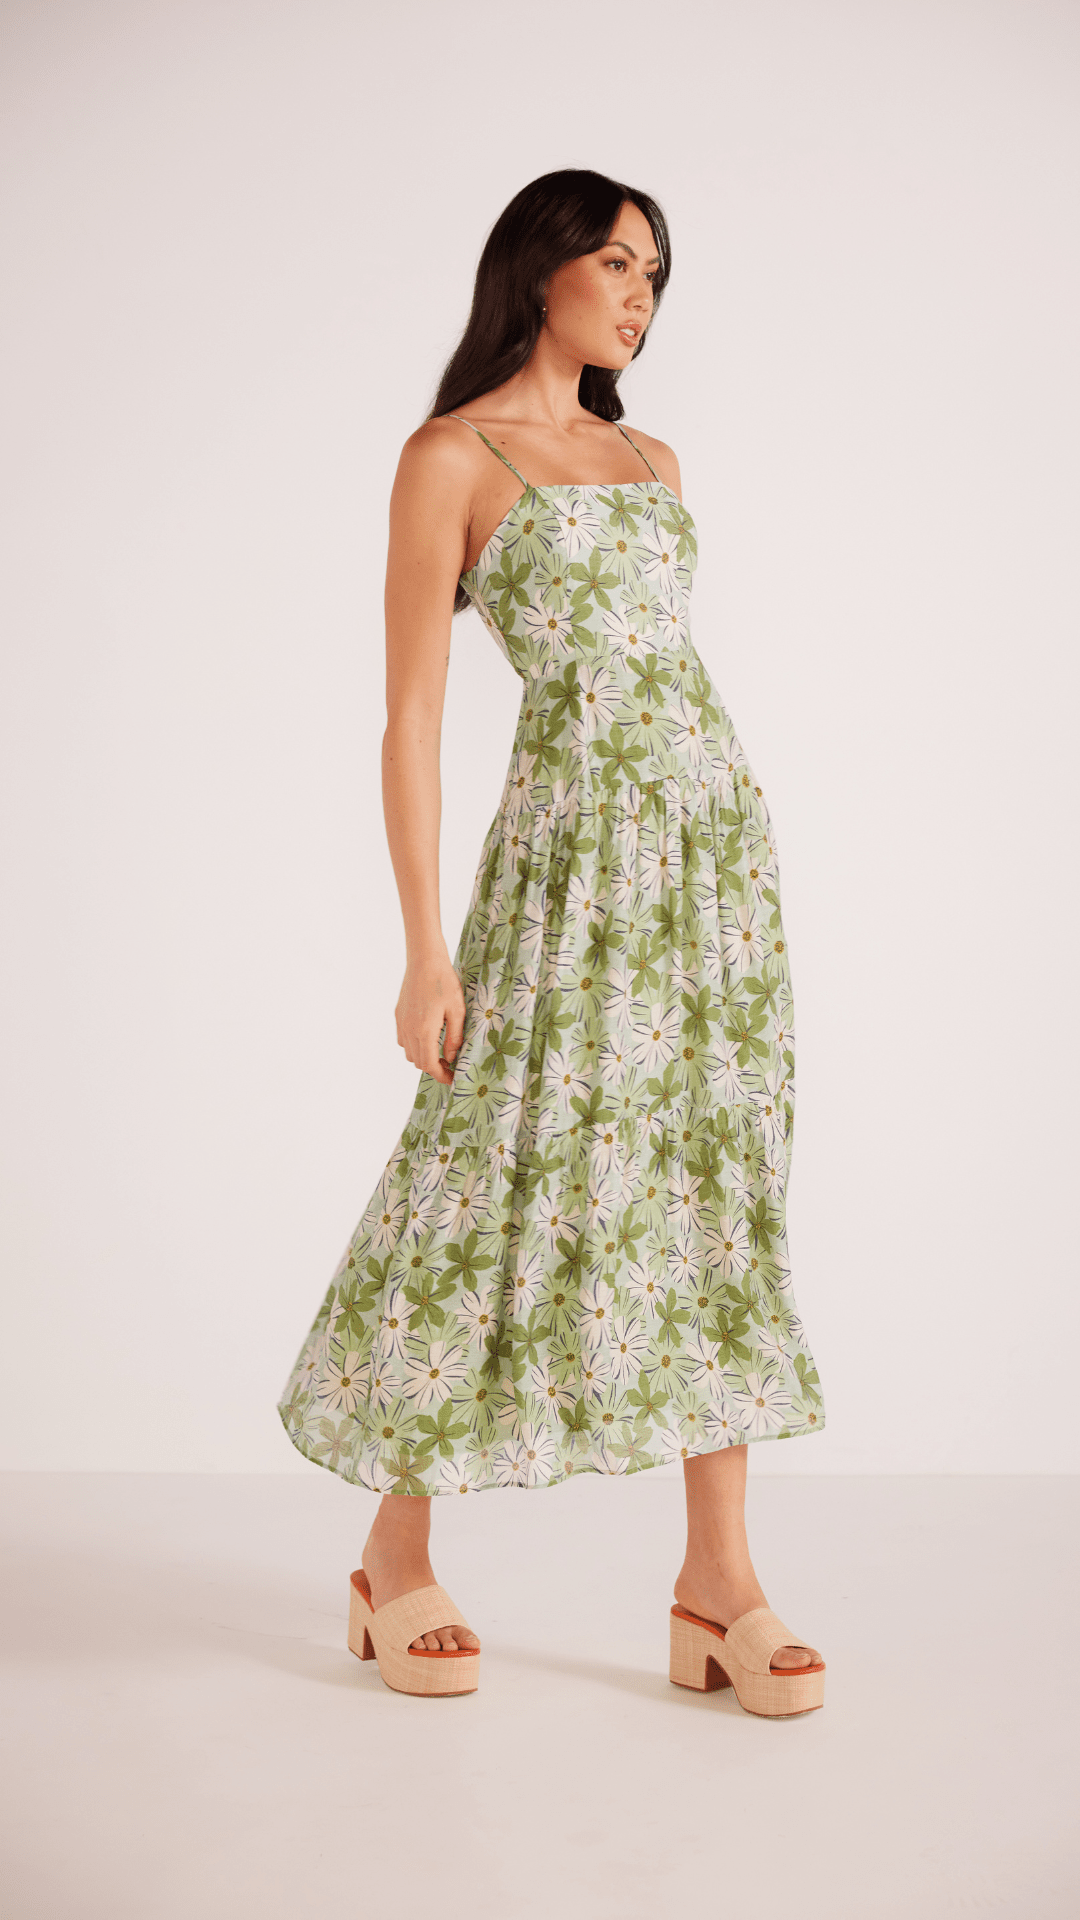 MINK PINK - MARGAUX MAXI DRESS - Green/White Floral ***PRE ORDER / DUE APPROX 22FEB*** Womens MINK PINK